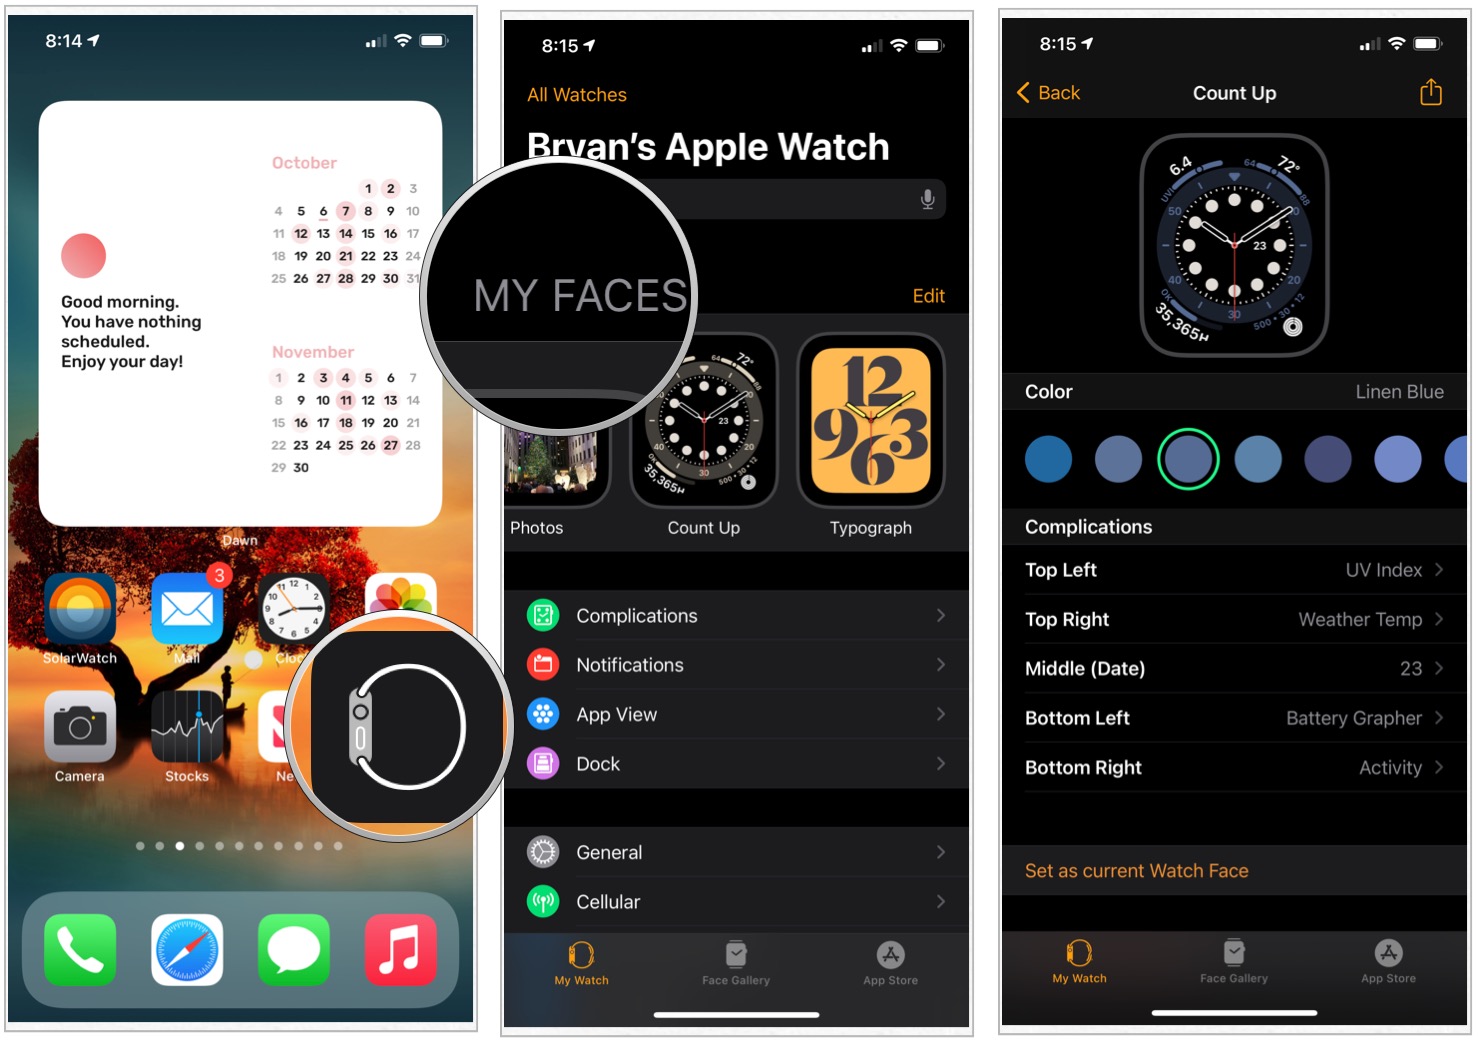 To change the color and style on your iPhone, launch the Watch app. Tap the My Watch tab and select a Watch face. Select a color and style. The change automatically changes for that face when used on Apple Watch.